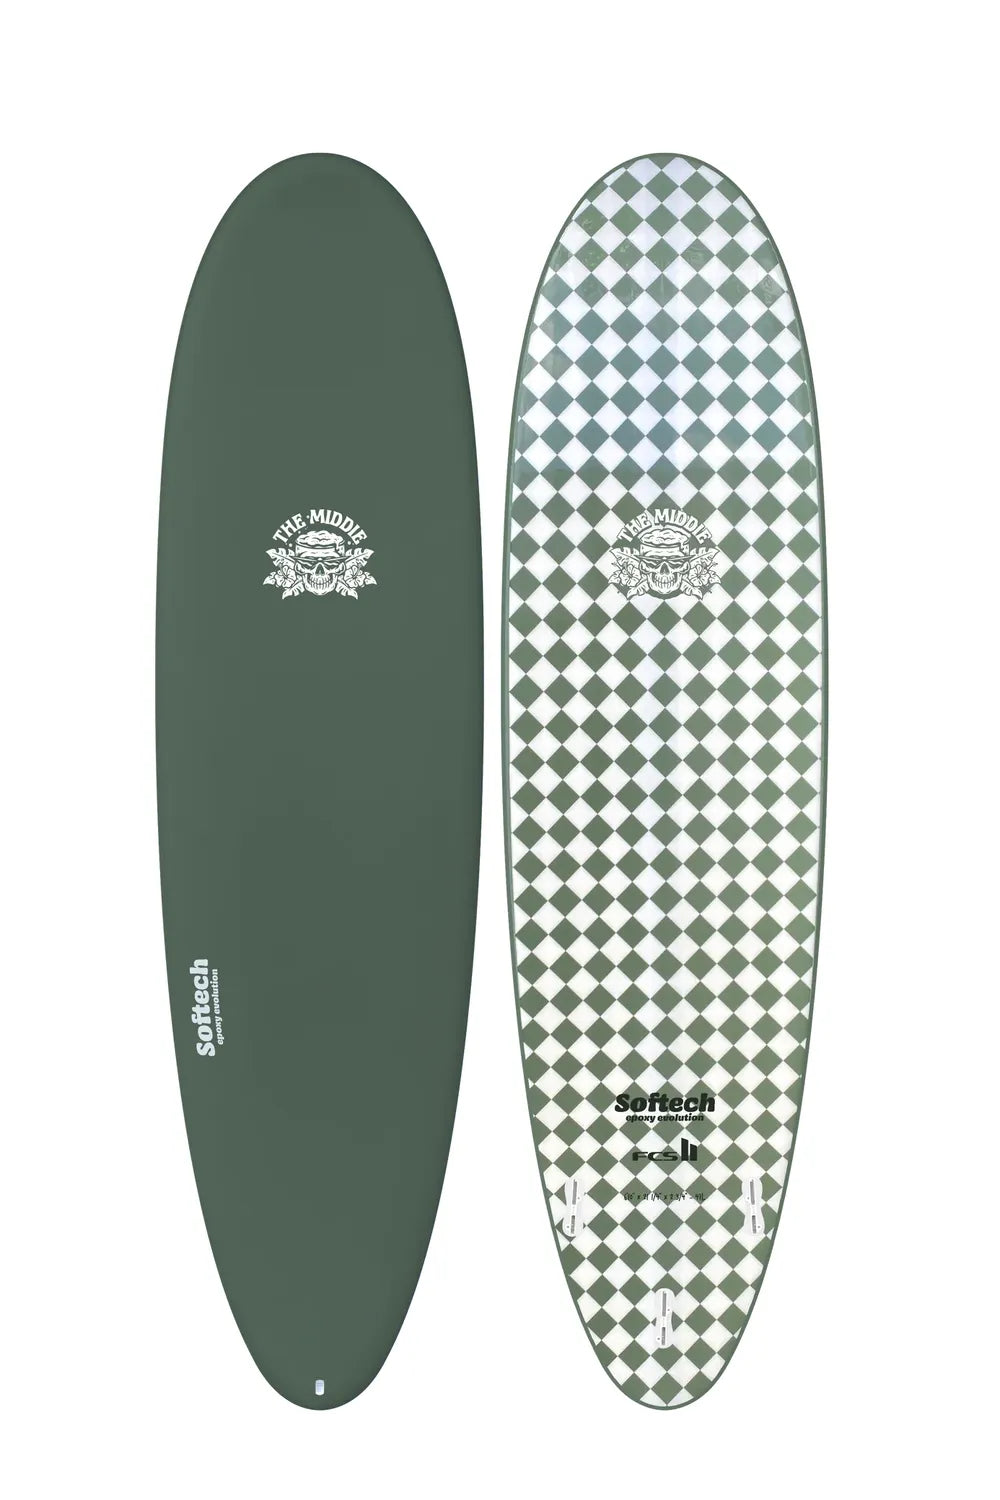 Softech Surfboard Midi top and bottom